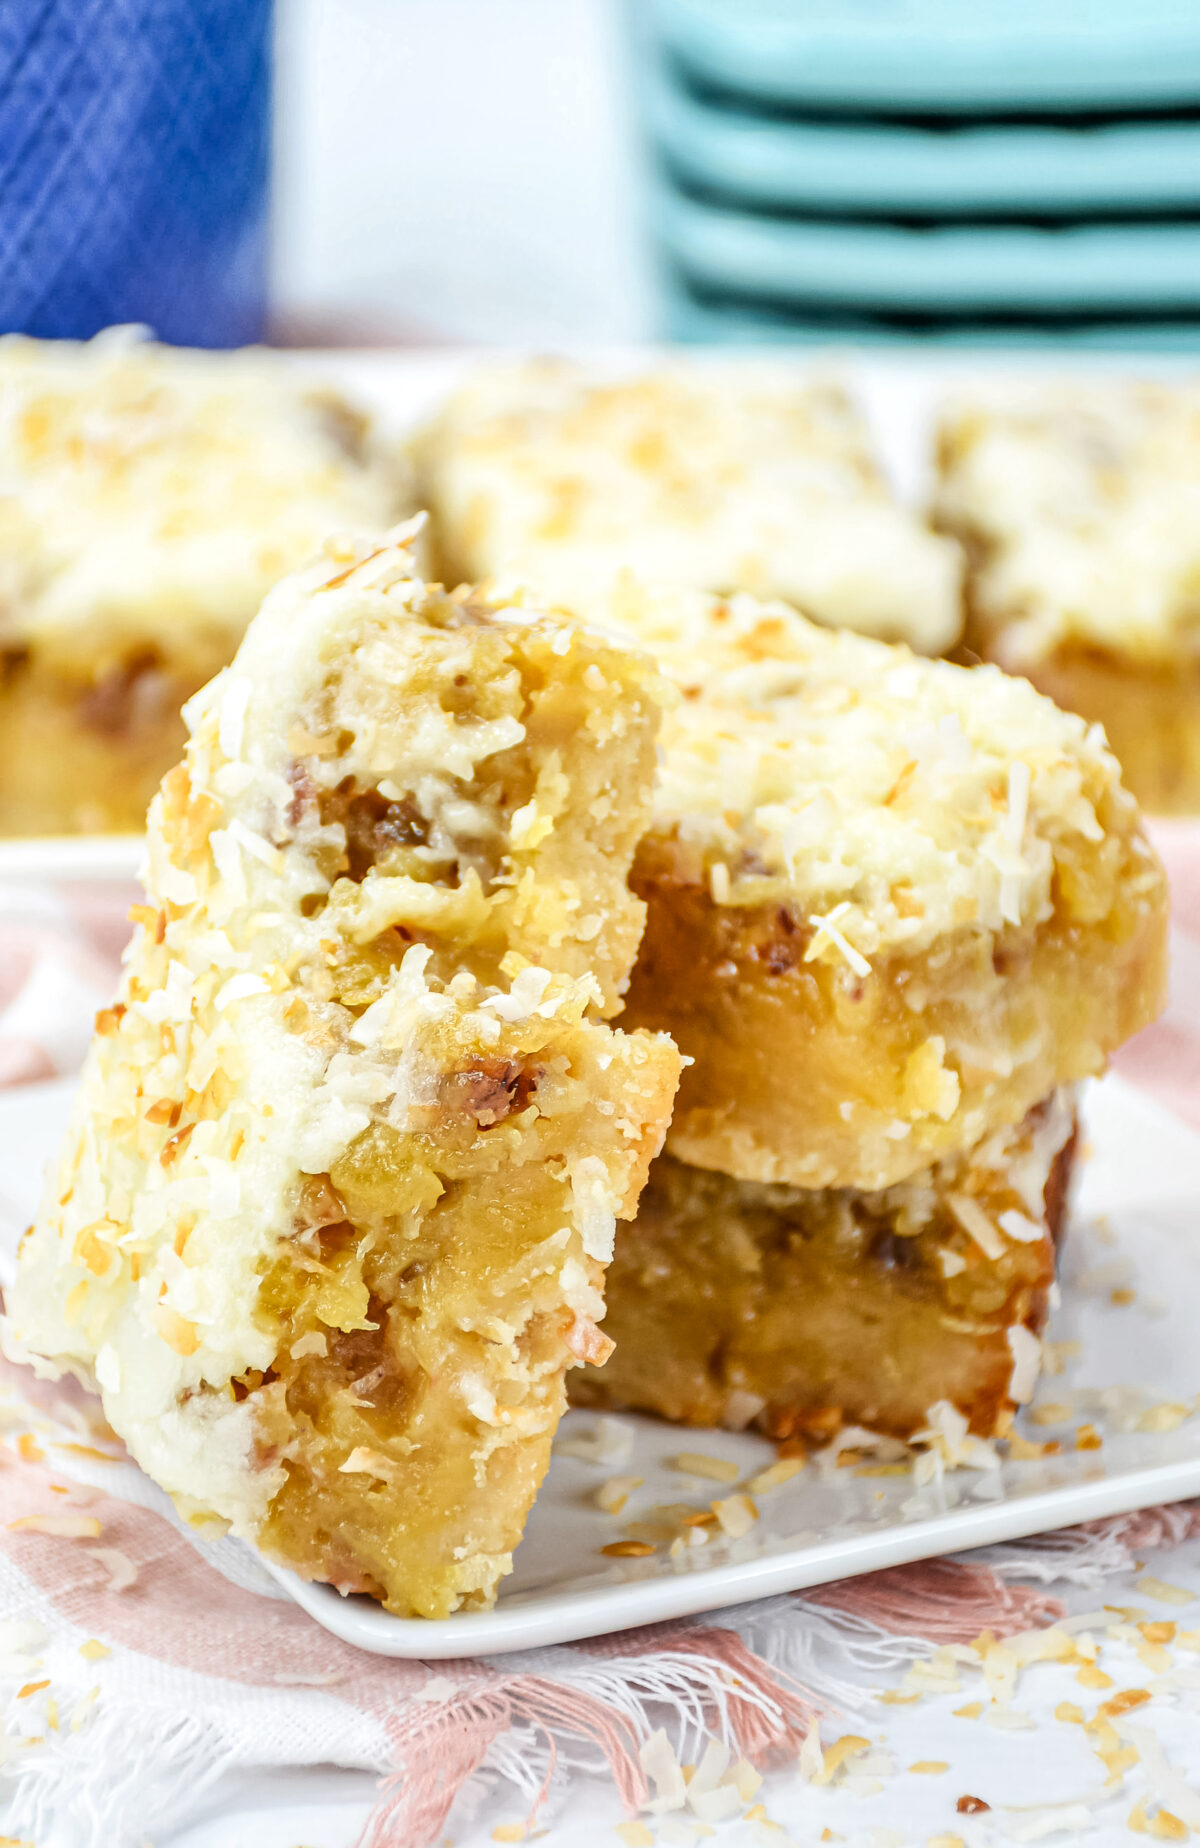 These delicious Hawaiian pineapple bars will transport you right to a tropical paradise with their pineapple, coconut and pecan filling!